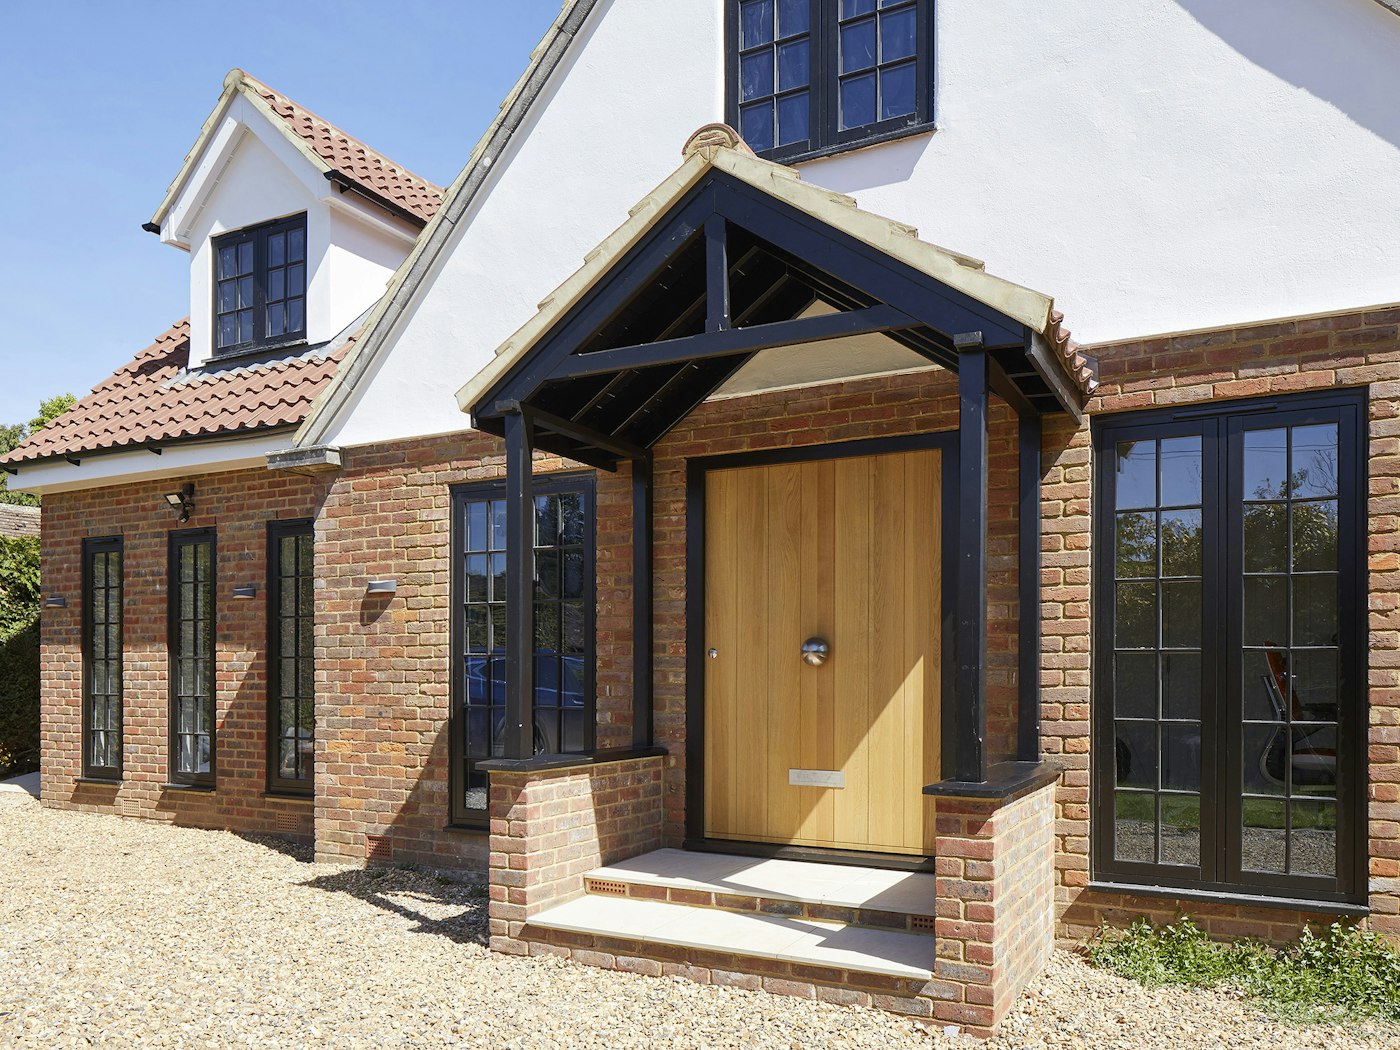 Outside, this oak front door blends nicely with the more traditional styling and red brick & white render materials